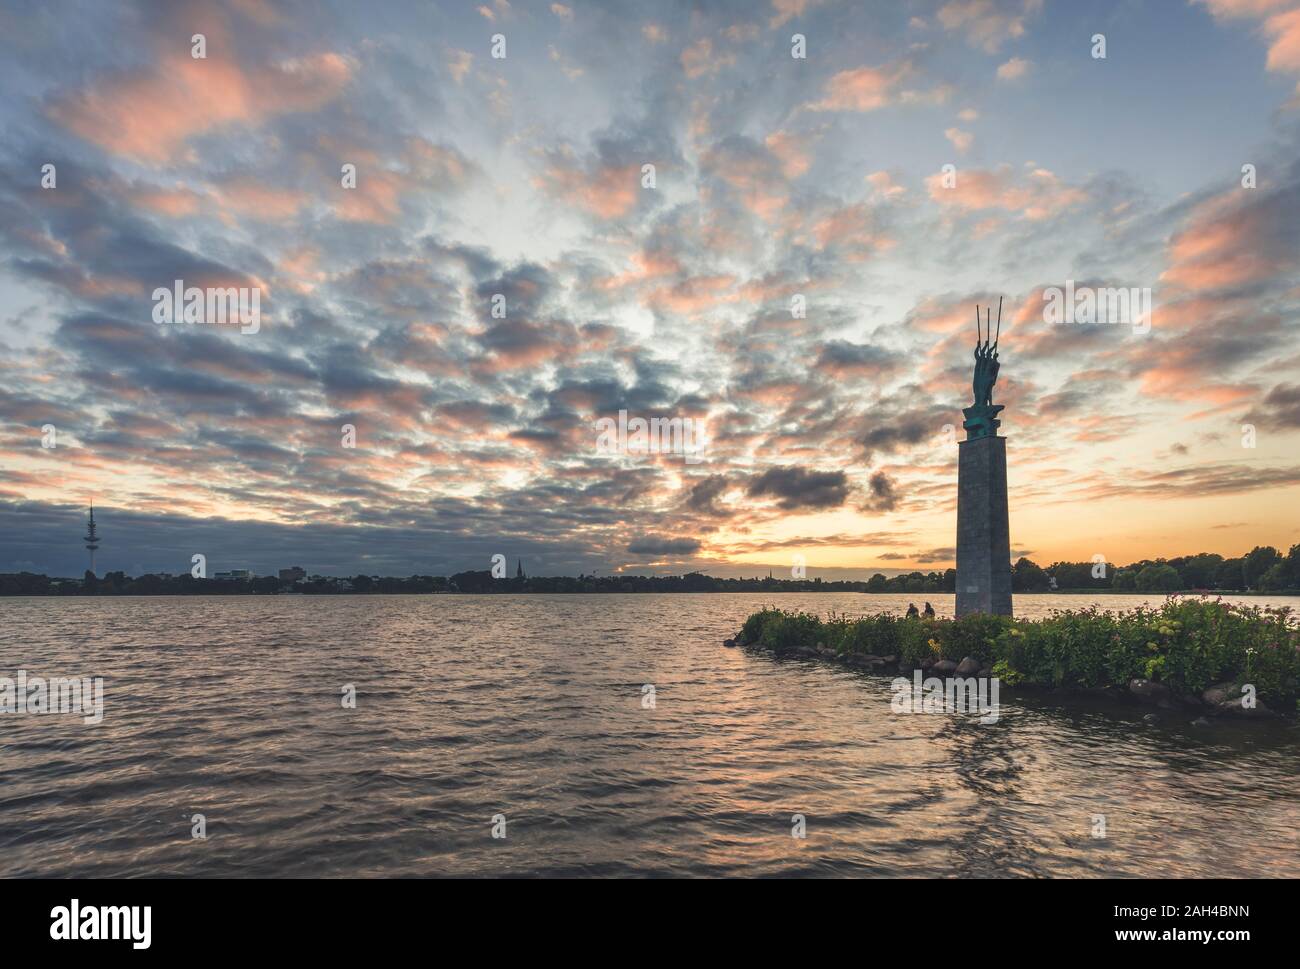 Germany, Hamburg, Outer Alster Lake with sculpture Three Men in the Boat by Edwin Paul Scharff at sunset Stock Photo